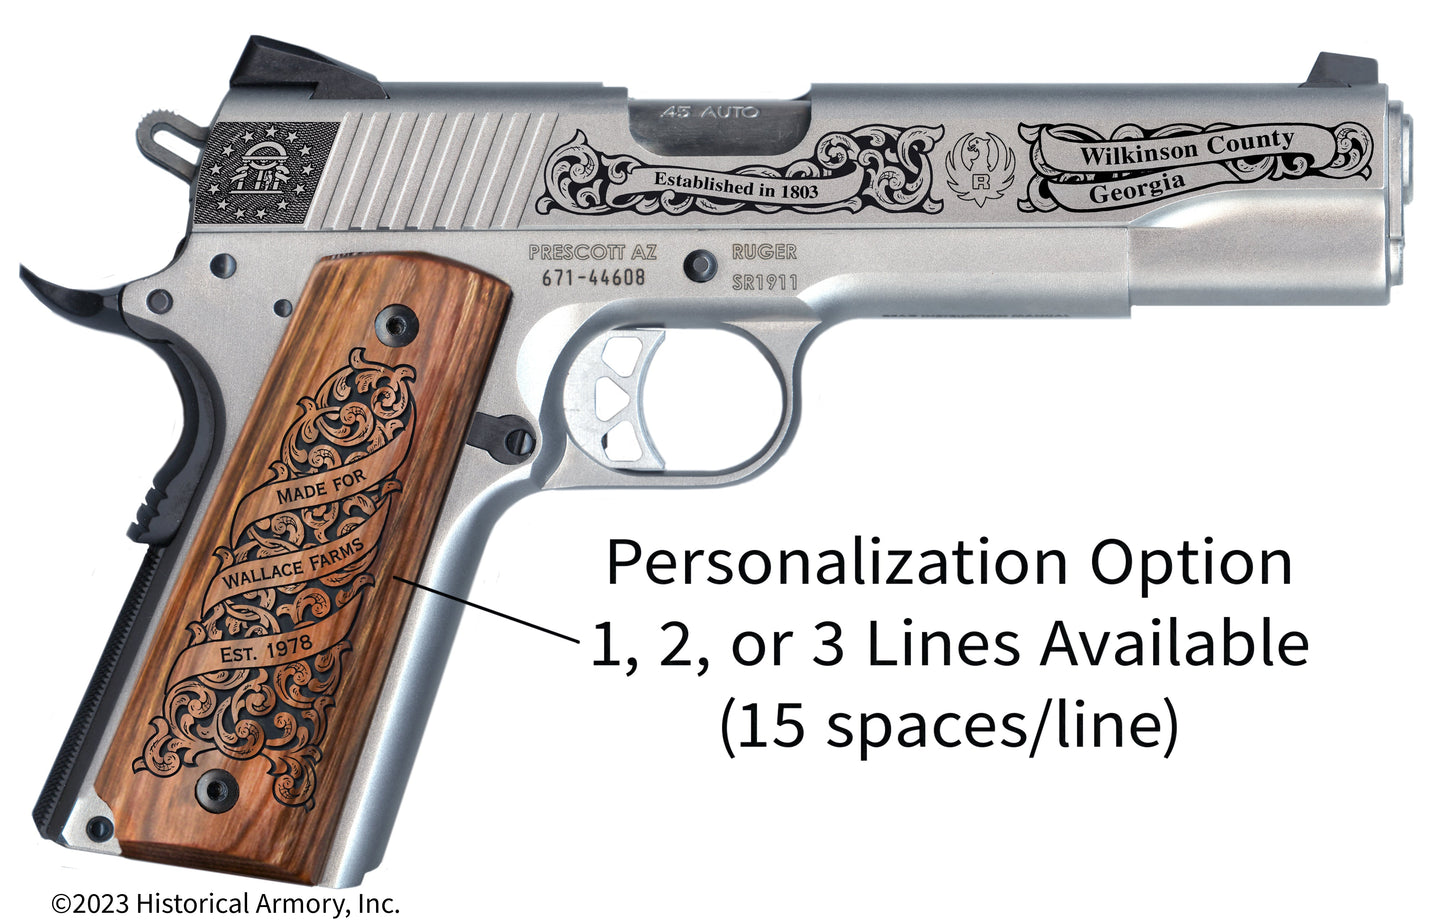 Wilkinson County Georgia Personalized Engraved .45 Auto Ruger 1911